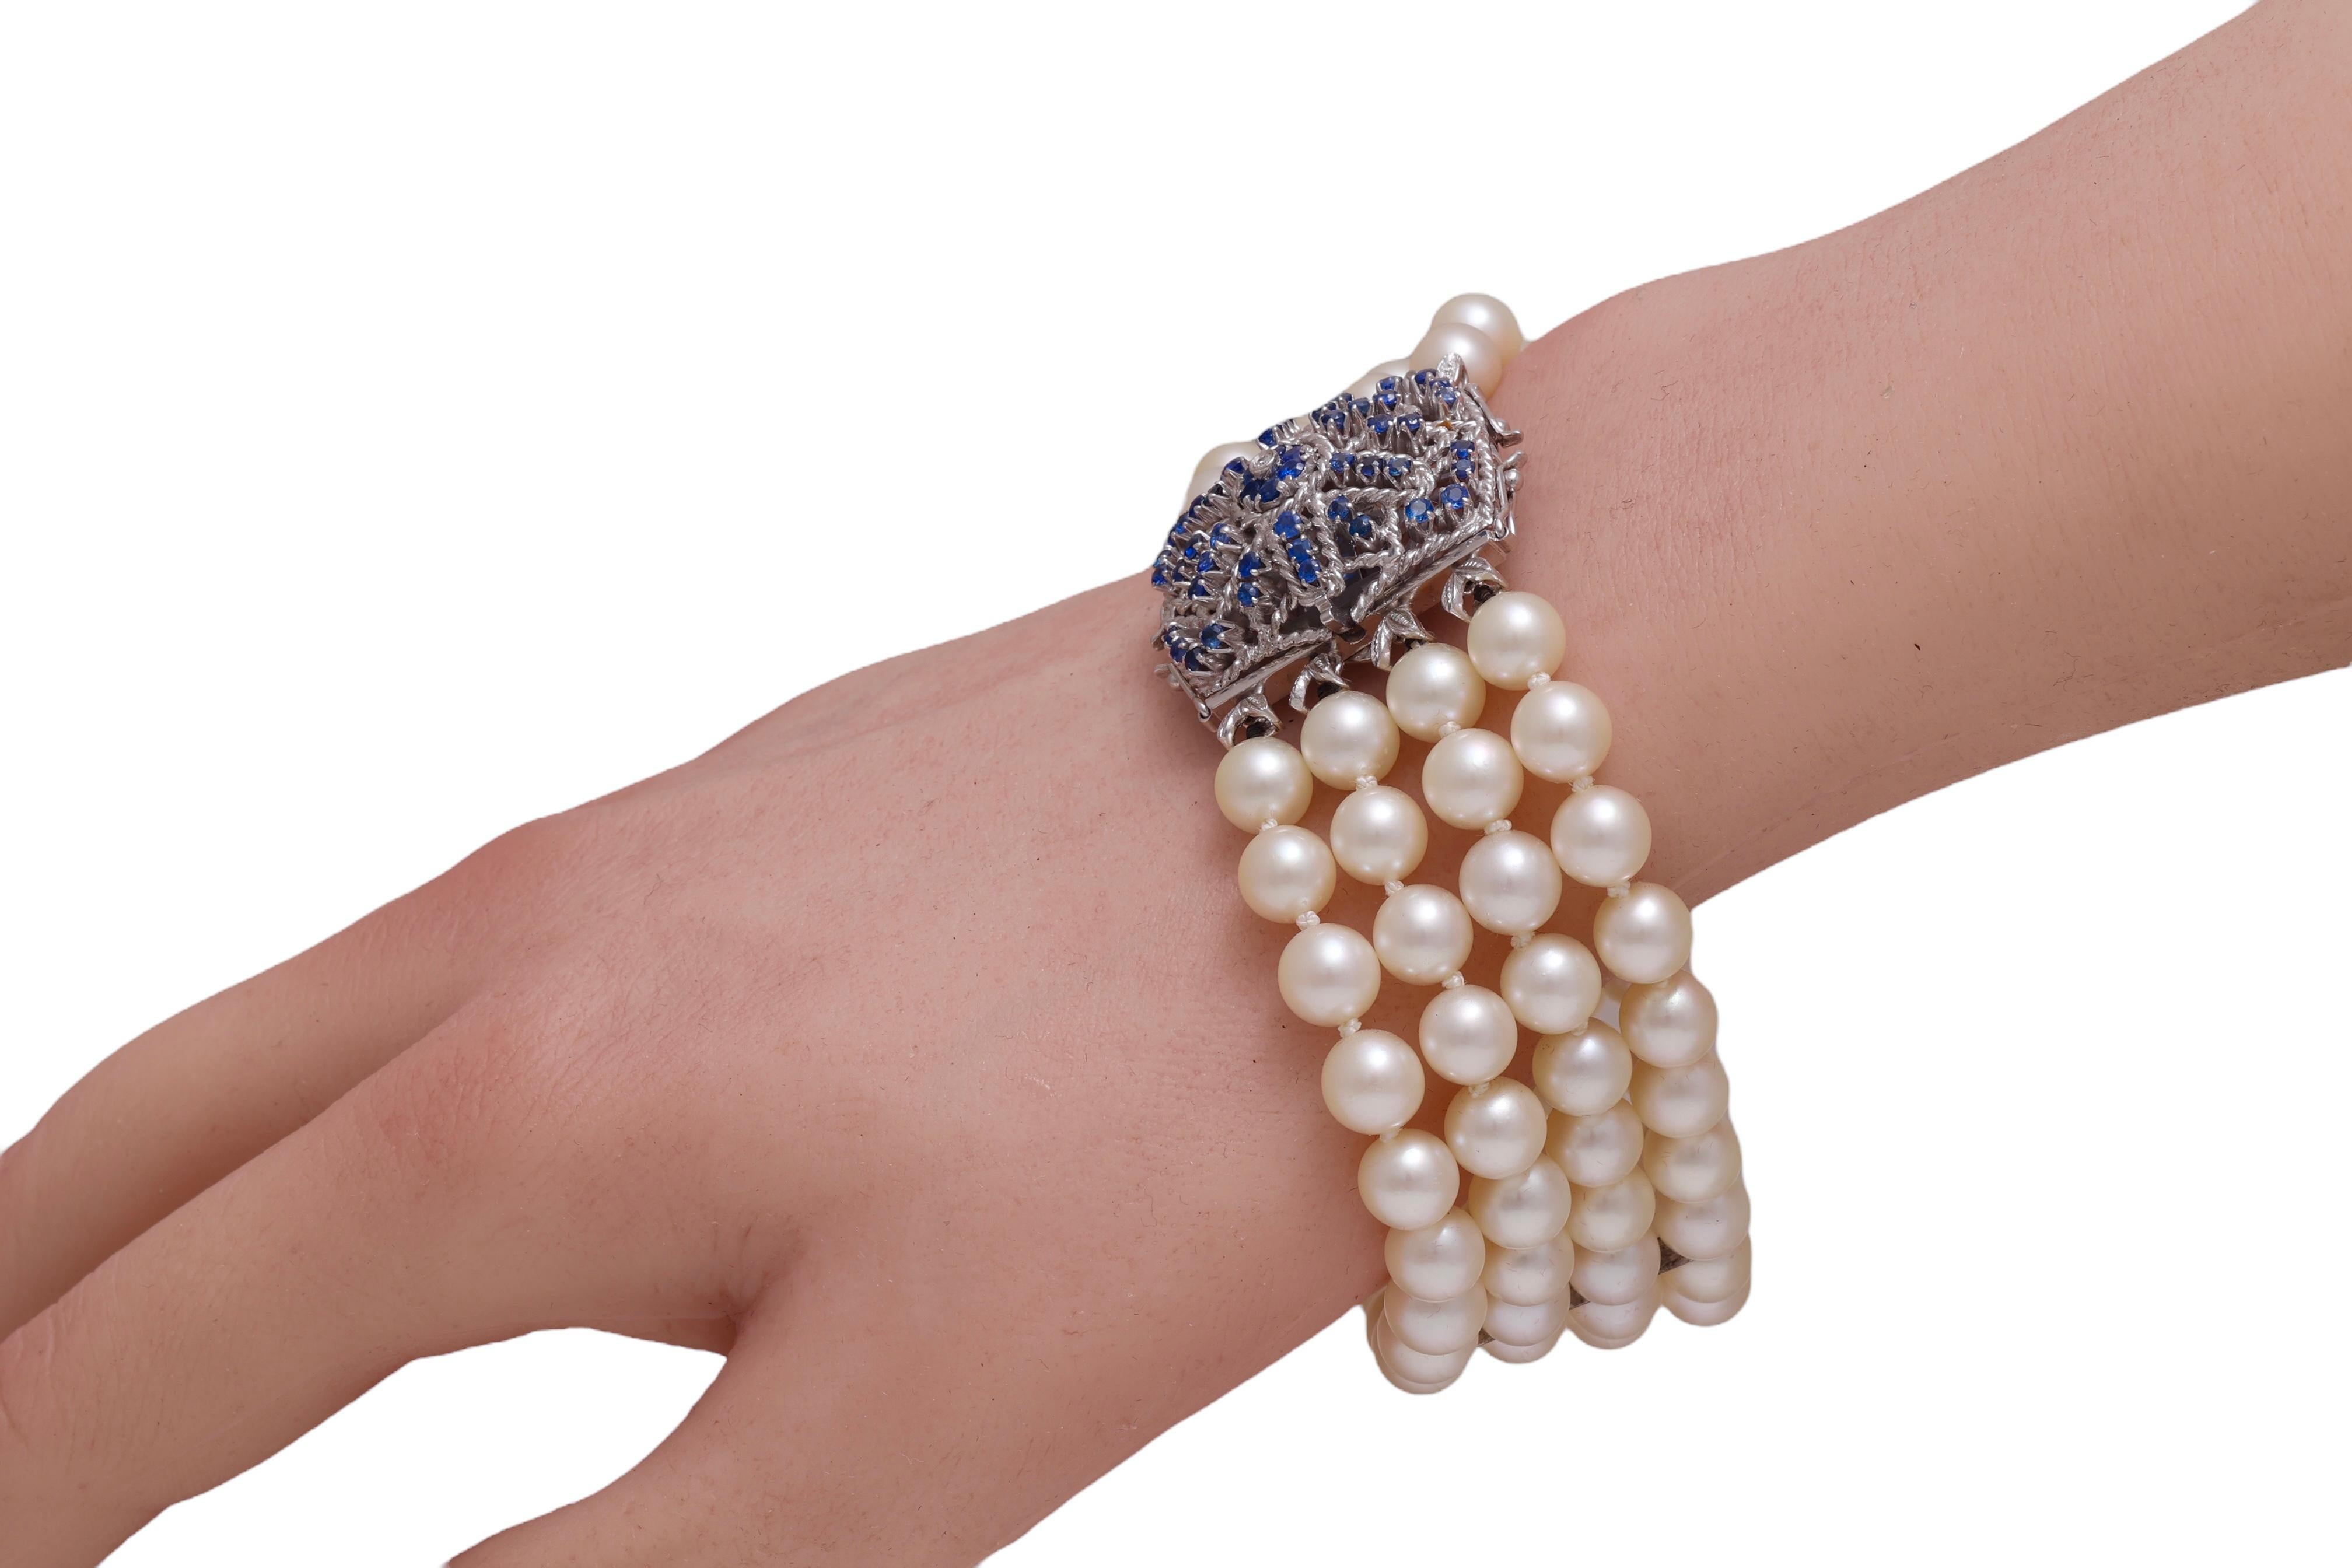 Gorgeous Japanese Akoya Pearl Bracelet with 18 kt. White Gold Locker with Sapphires & a Diamond

Sapphires: 52 blue semi precious stones, together 1.35 ct.

Diamond: 1 brilliant cut diamond 0.03 ct.

Pearls: Japanese Akoya Top Quality , 96 pearls